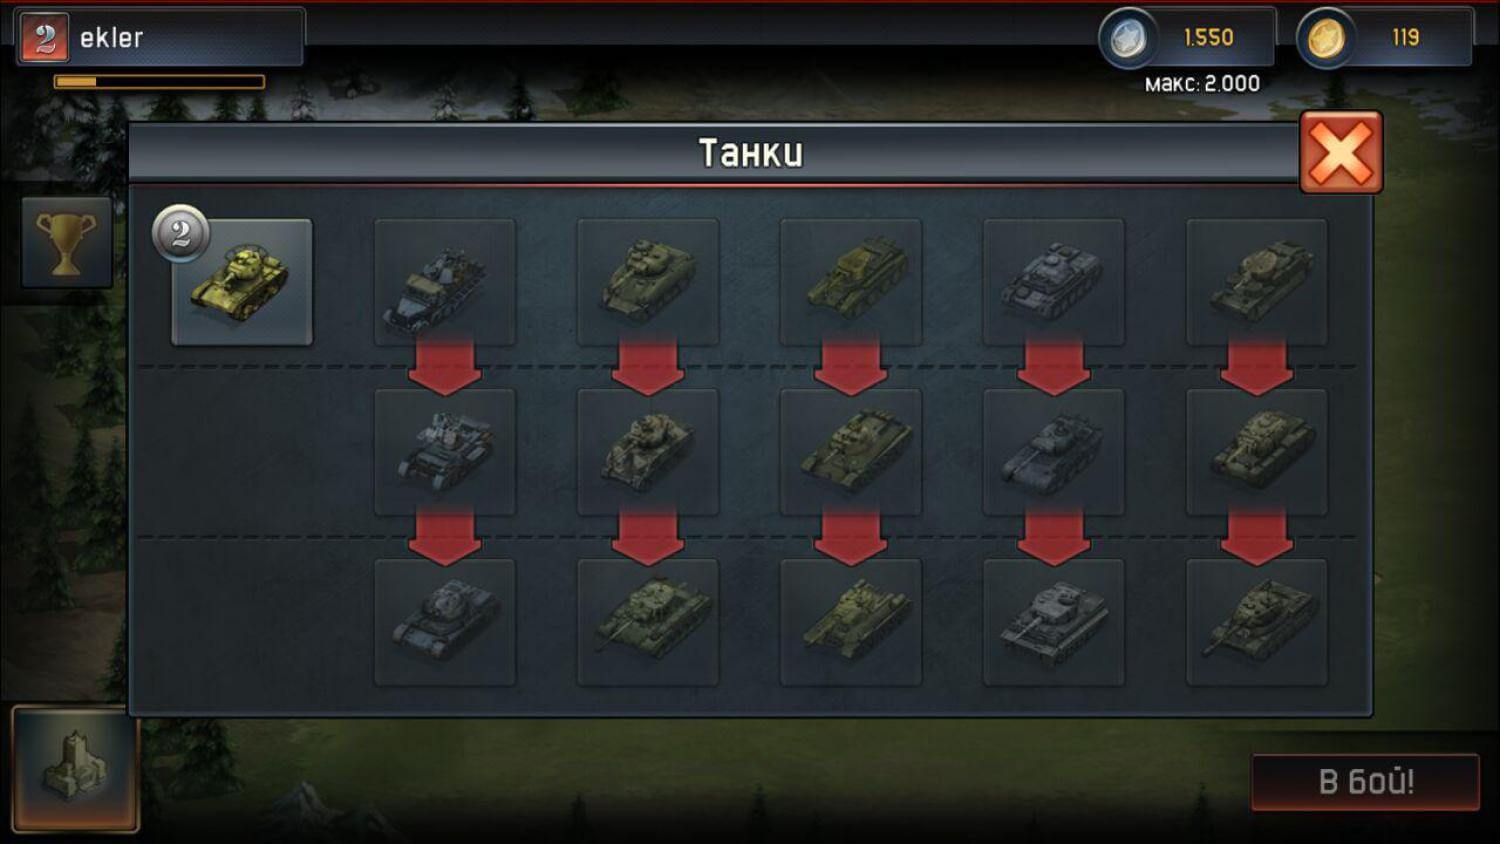 War Thunder: Conflicts